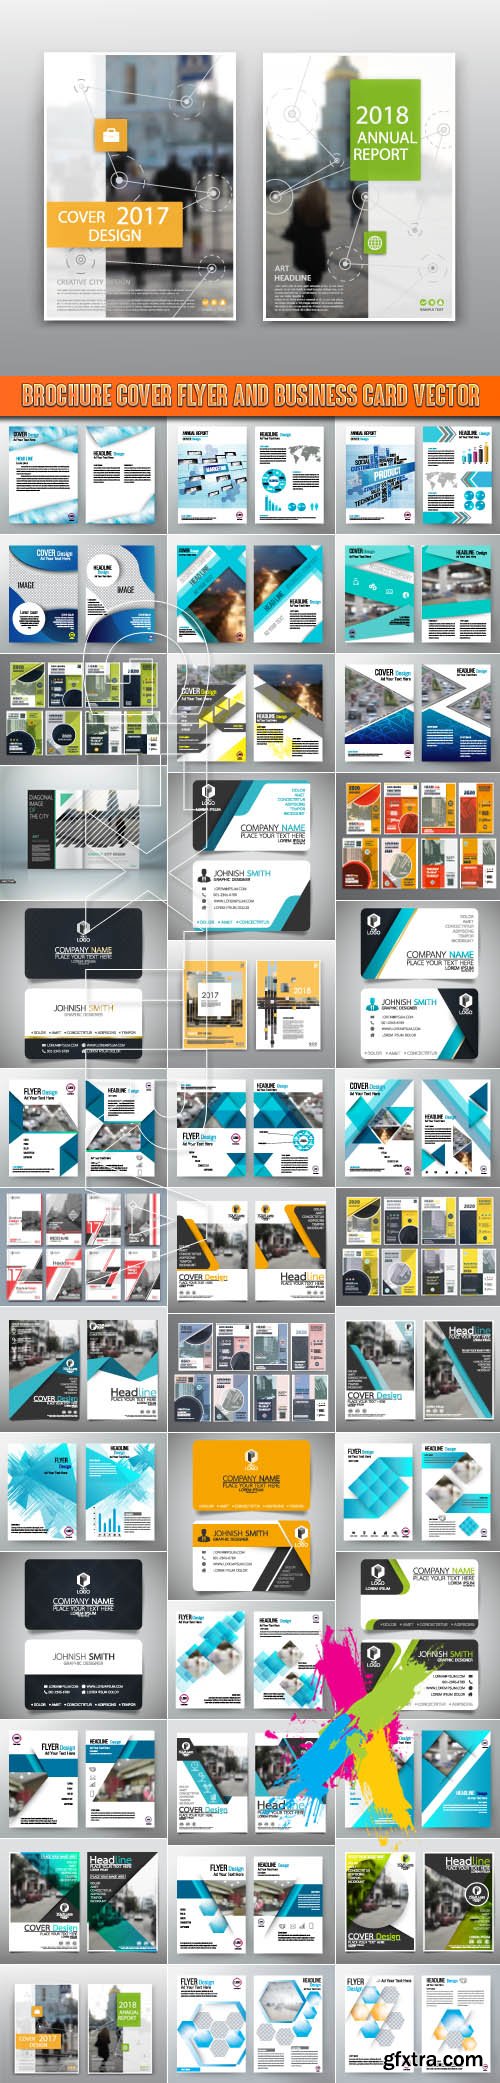 Brochure cover flyer and business card vector